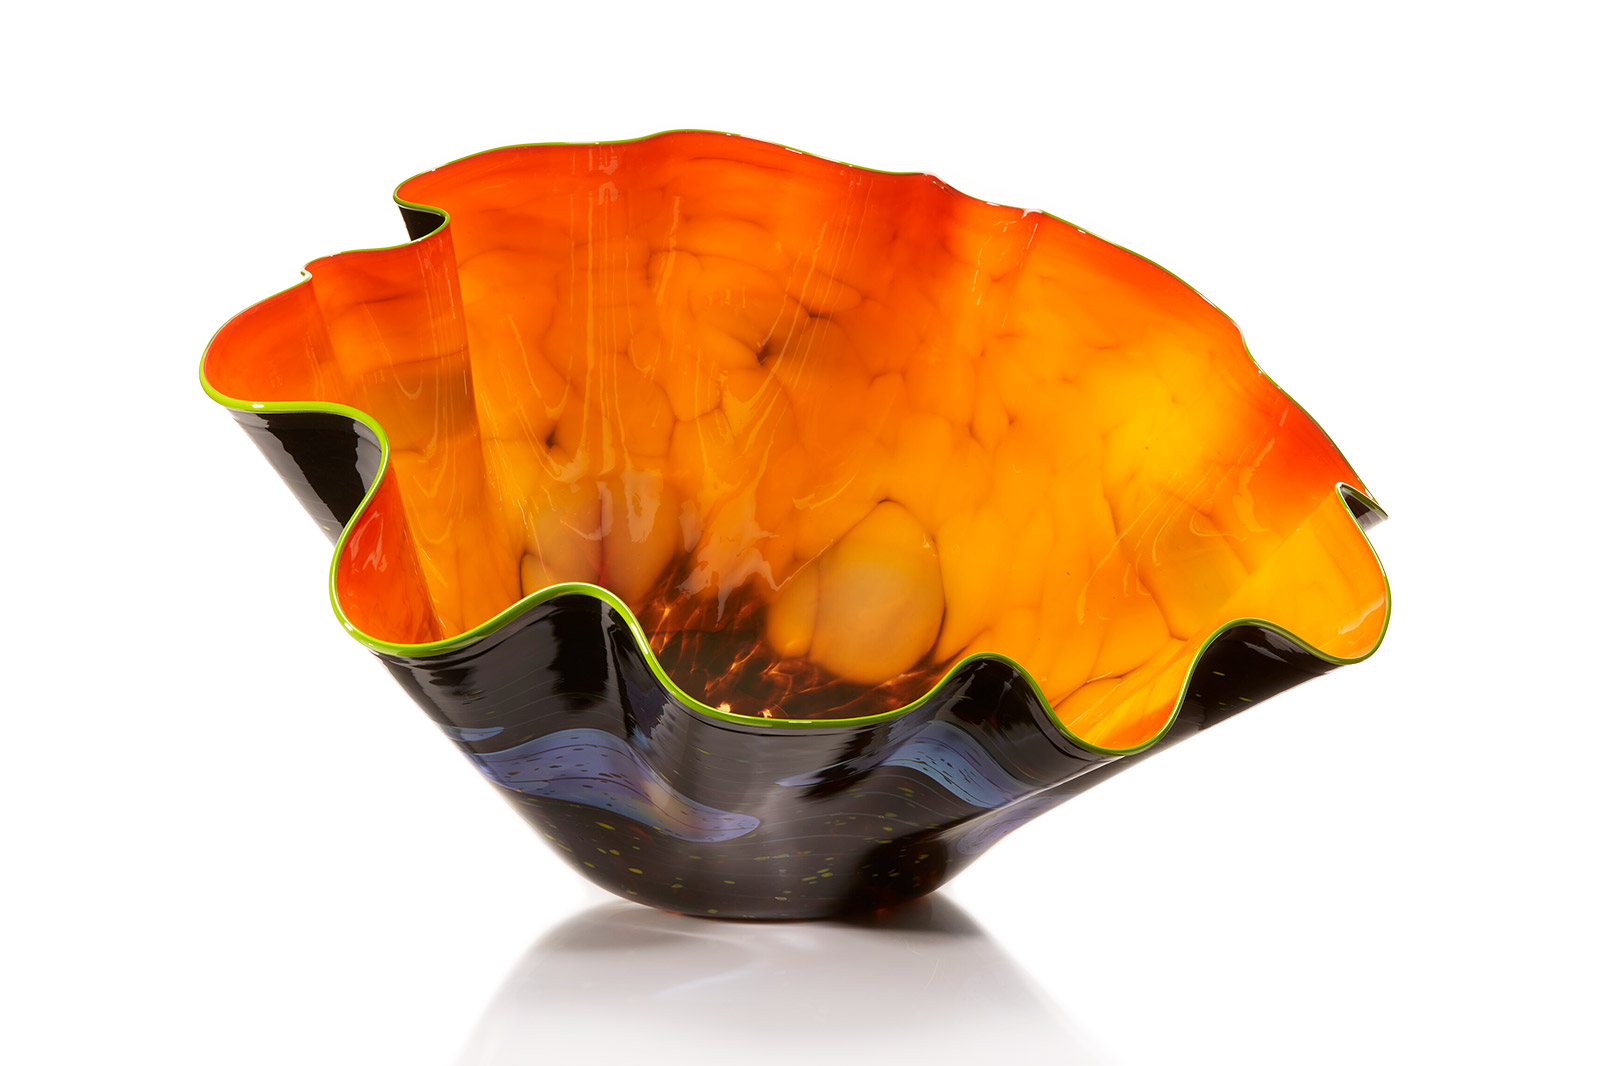 Harvest Orange Macchia with Field Green Lip Wrap, 2019, Dale Chihuly